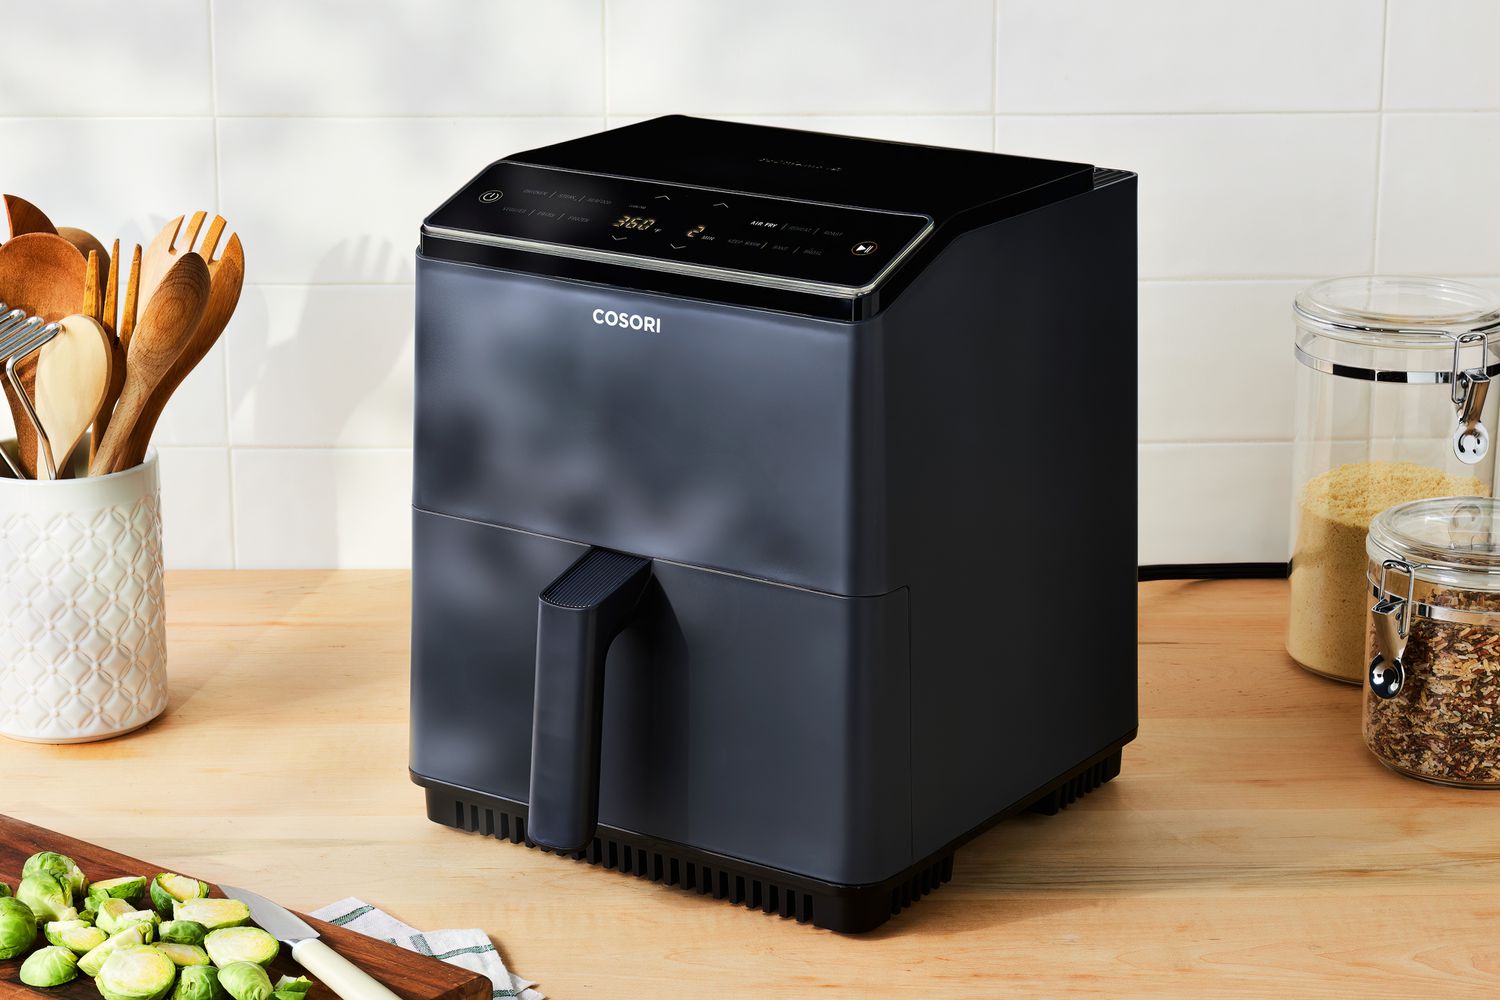 A Cosori Dual Blaze Smart Air Fryer displayed on a wood countertop among cooking ingredients